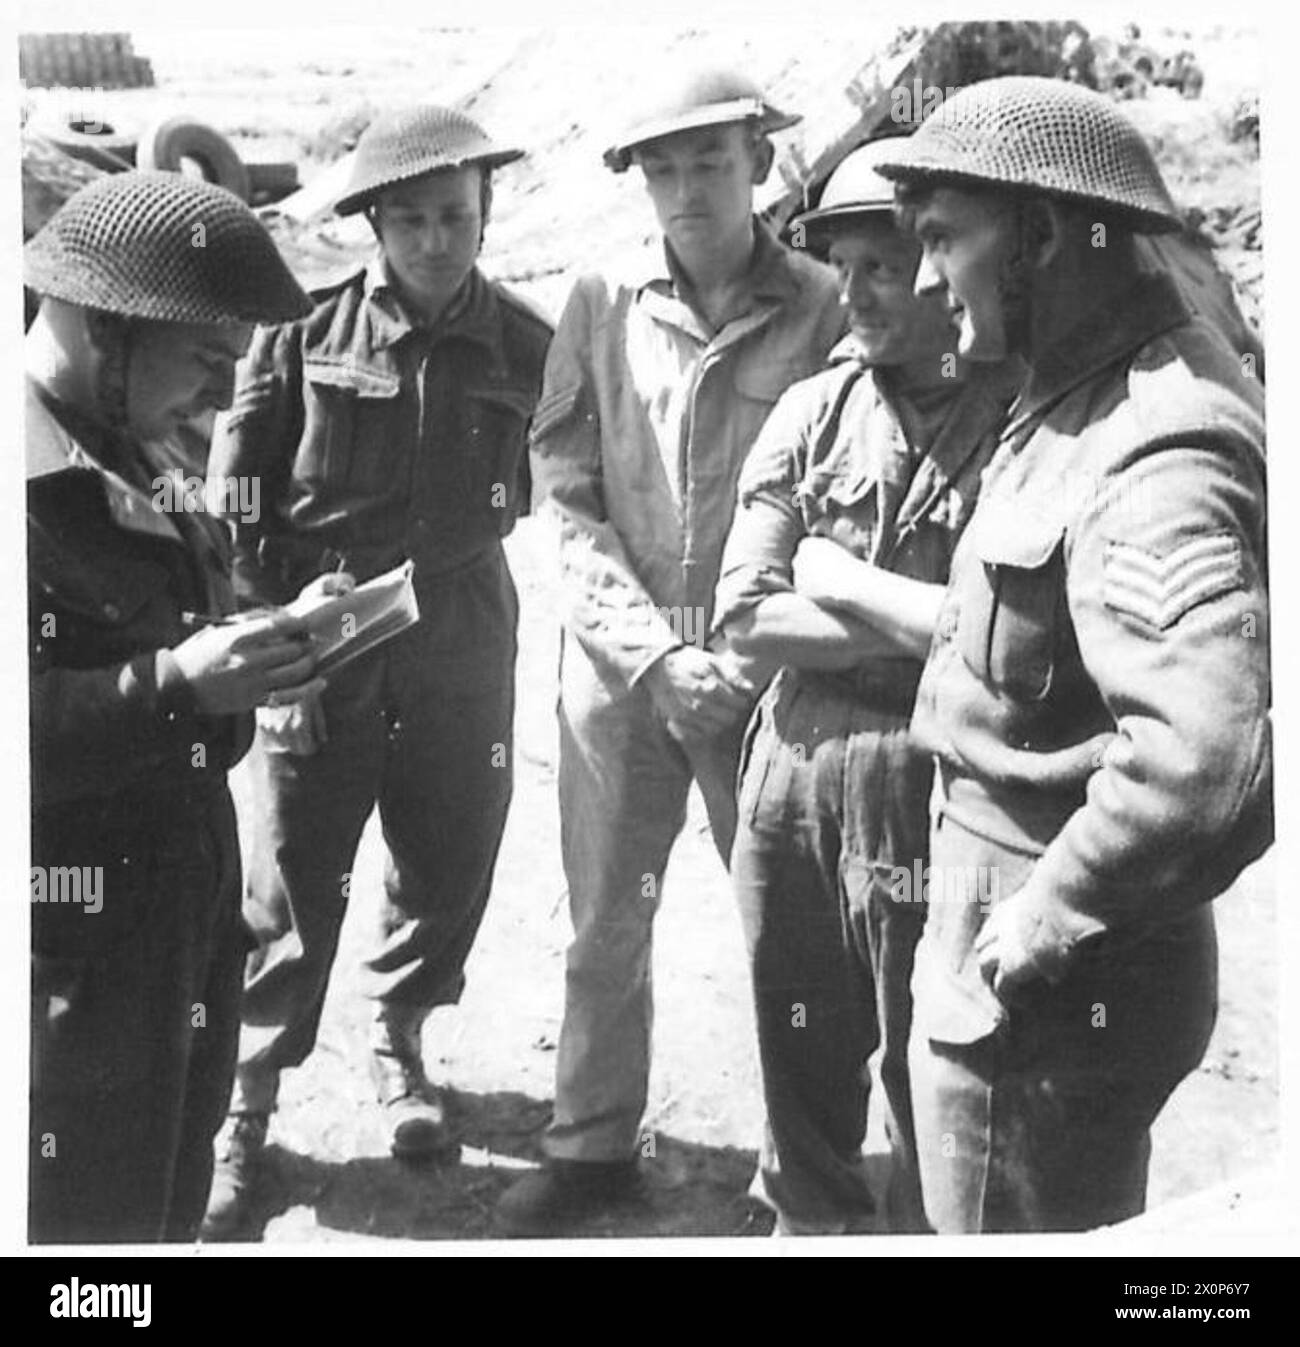 ITALY - ANZIO BRIDGEHEAD A MOBILE FIELD LAUNDRY - The O.C. of the platoon gives his orders to the Sections Sergeants. Left to right: - Capt. L.W. Cawley of Westover, Seaton Road, Axminster, Devon. Sgt. K. Clark of 1, Aubrey Road, Crouch End, London, N. Sgt. A.F. Wenborn of 182 Edward Street, New Cross, Lonfon, S.E.14. Sgt. E.H. Jones of 14 Church Lane, Bromley Common, Kent. Sgt. R. Gowland of 103 Juliet Street, Ashington, Northumberland. Photographic negative , British Army Stock Photo